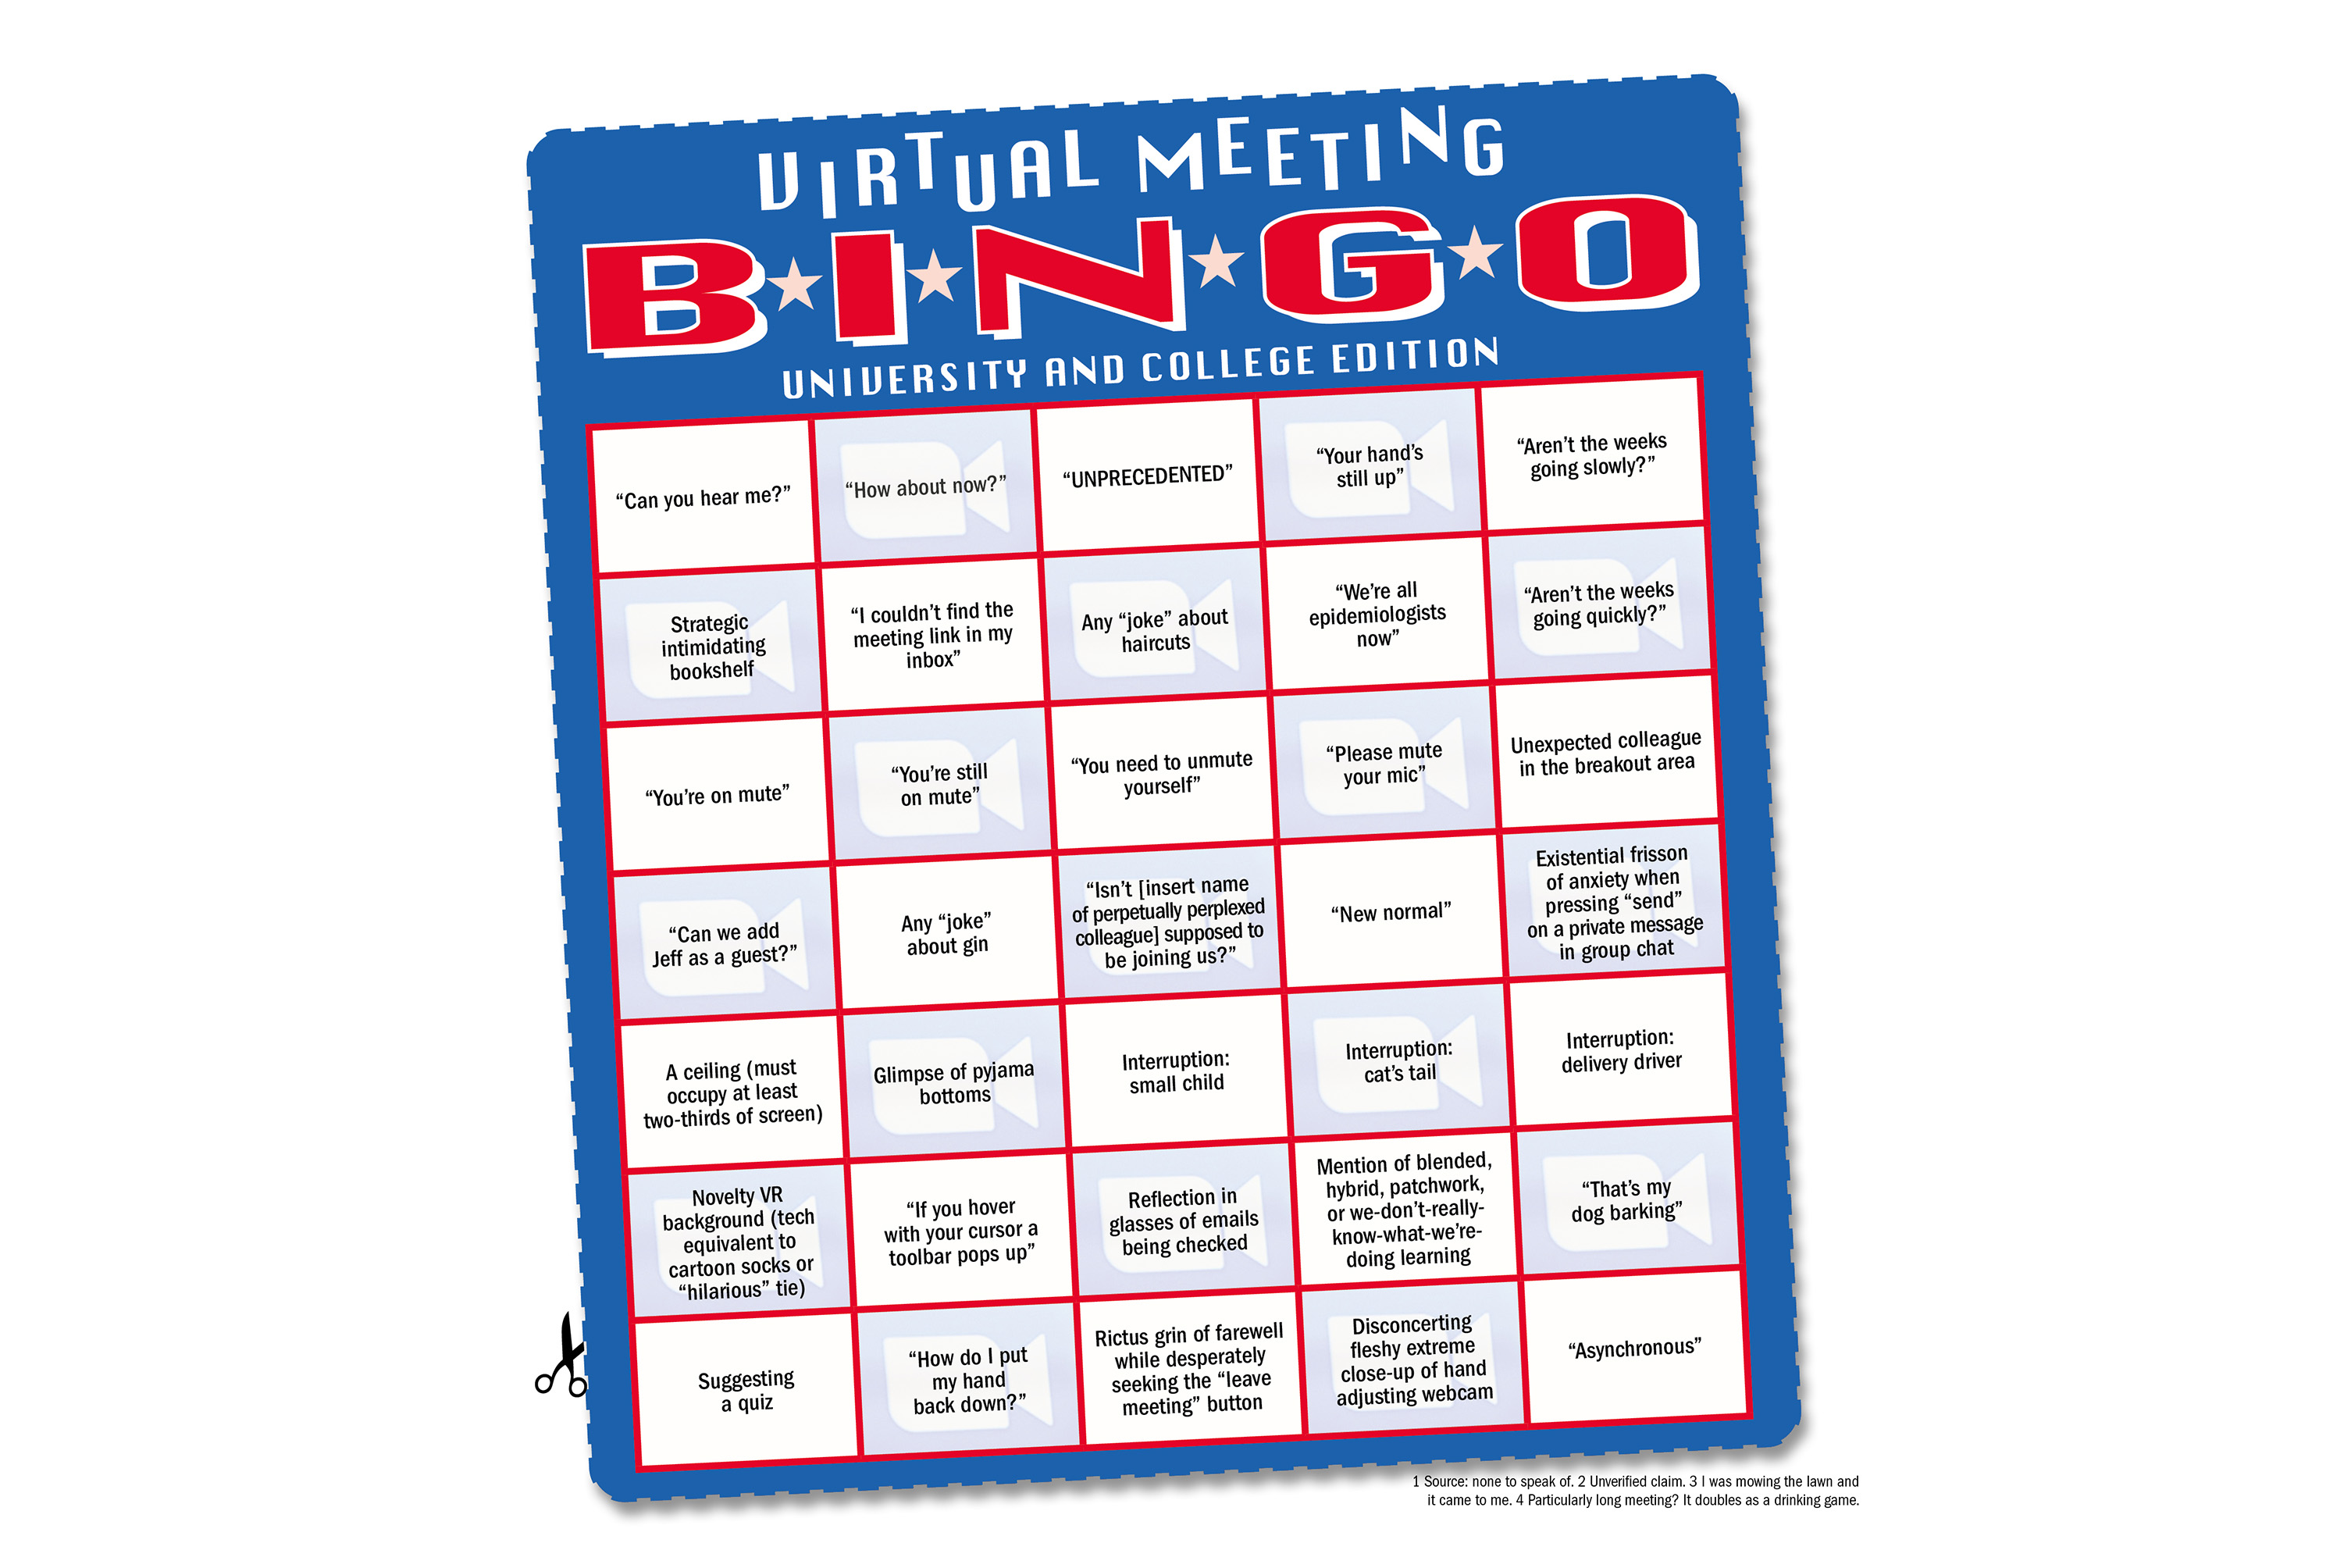 How do you turn a normal bingo into a drinking game?